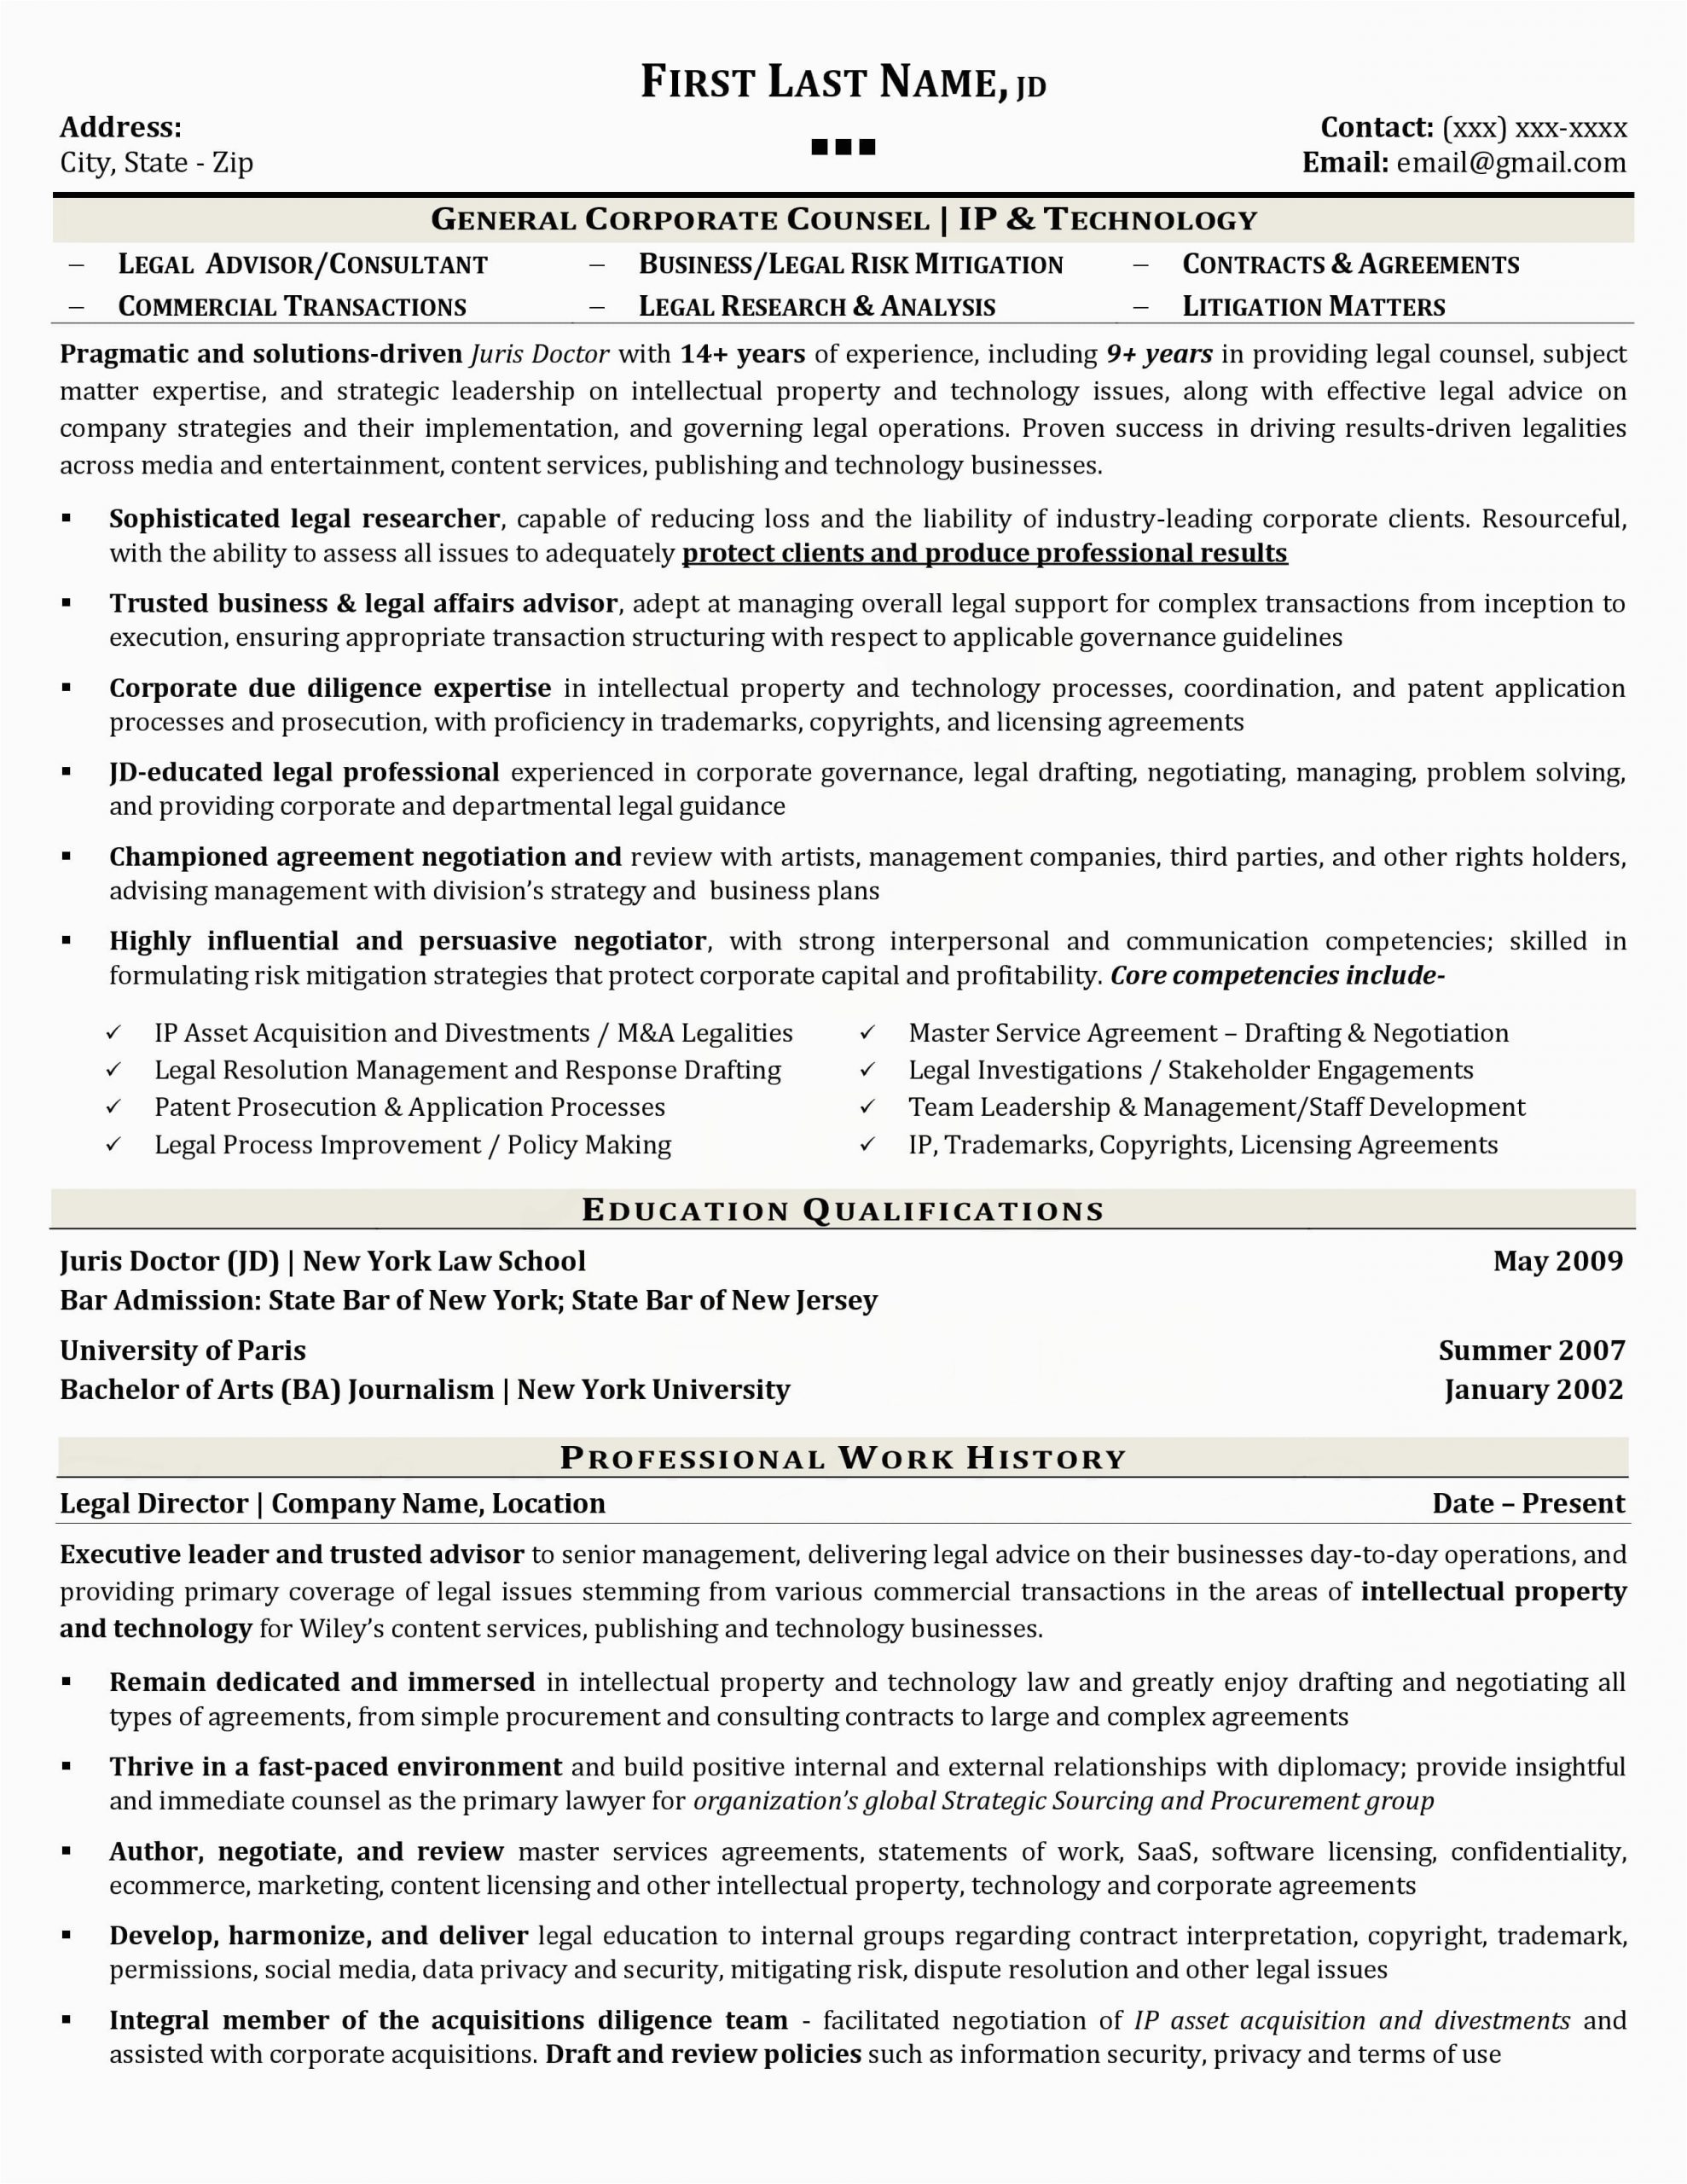 Sample High School Resume for Ivy League Ivy League Resumes